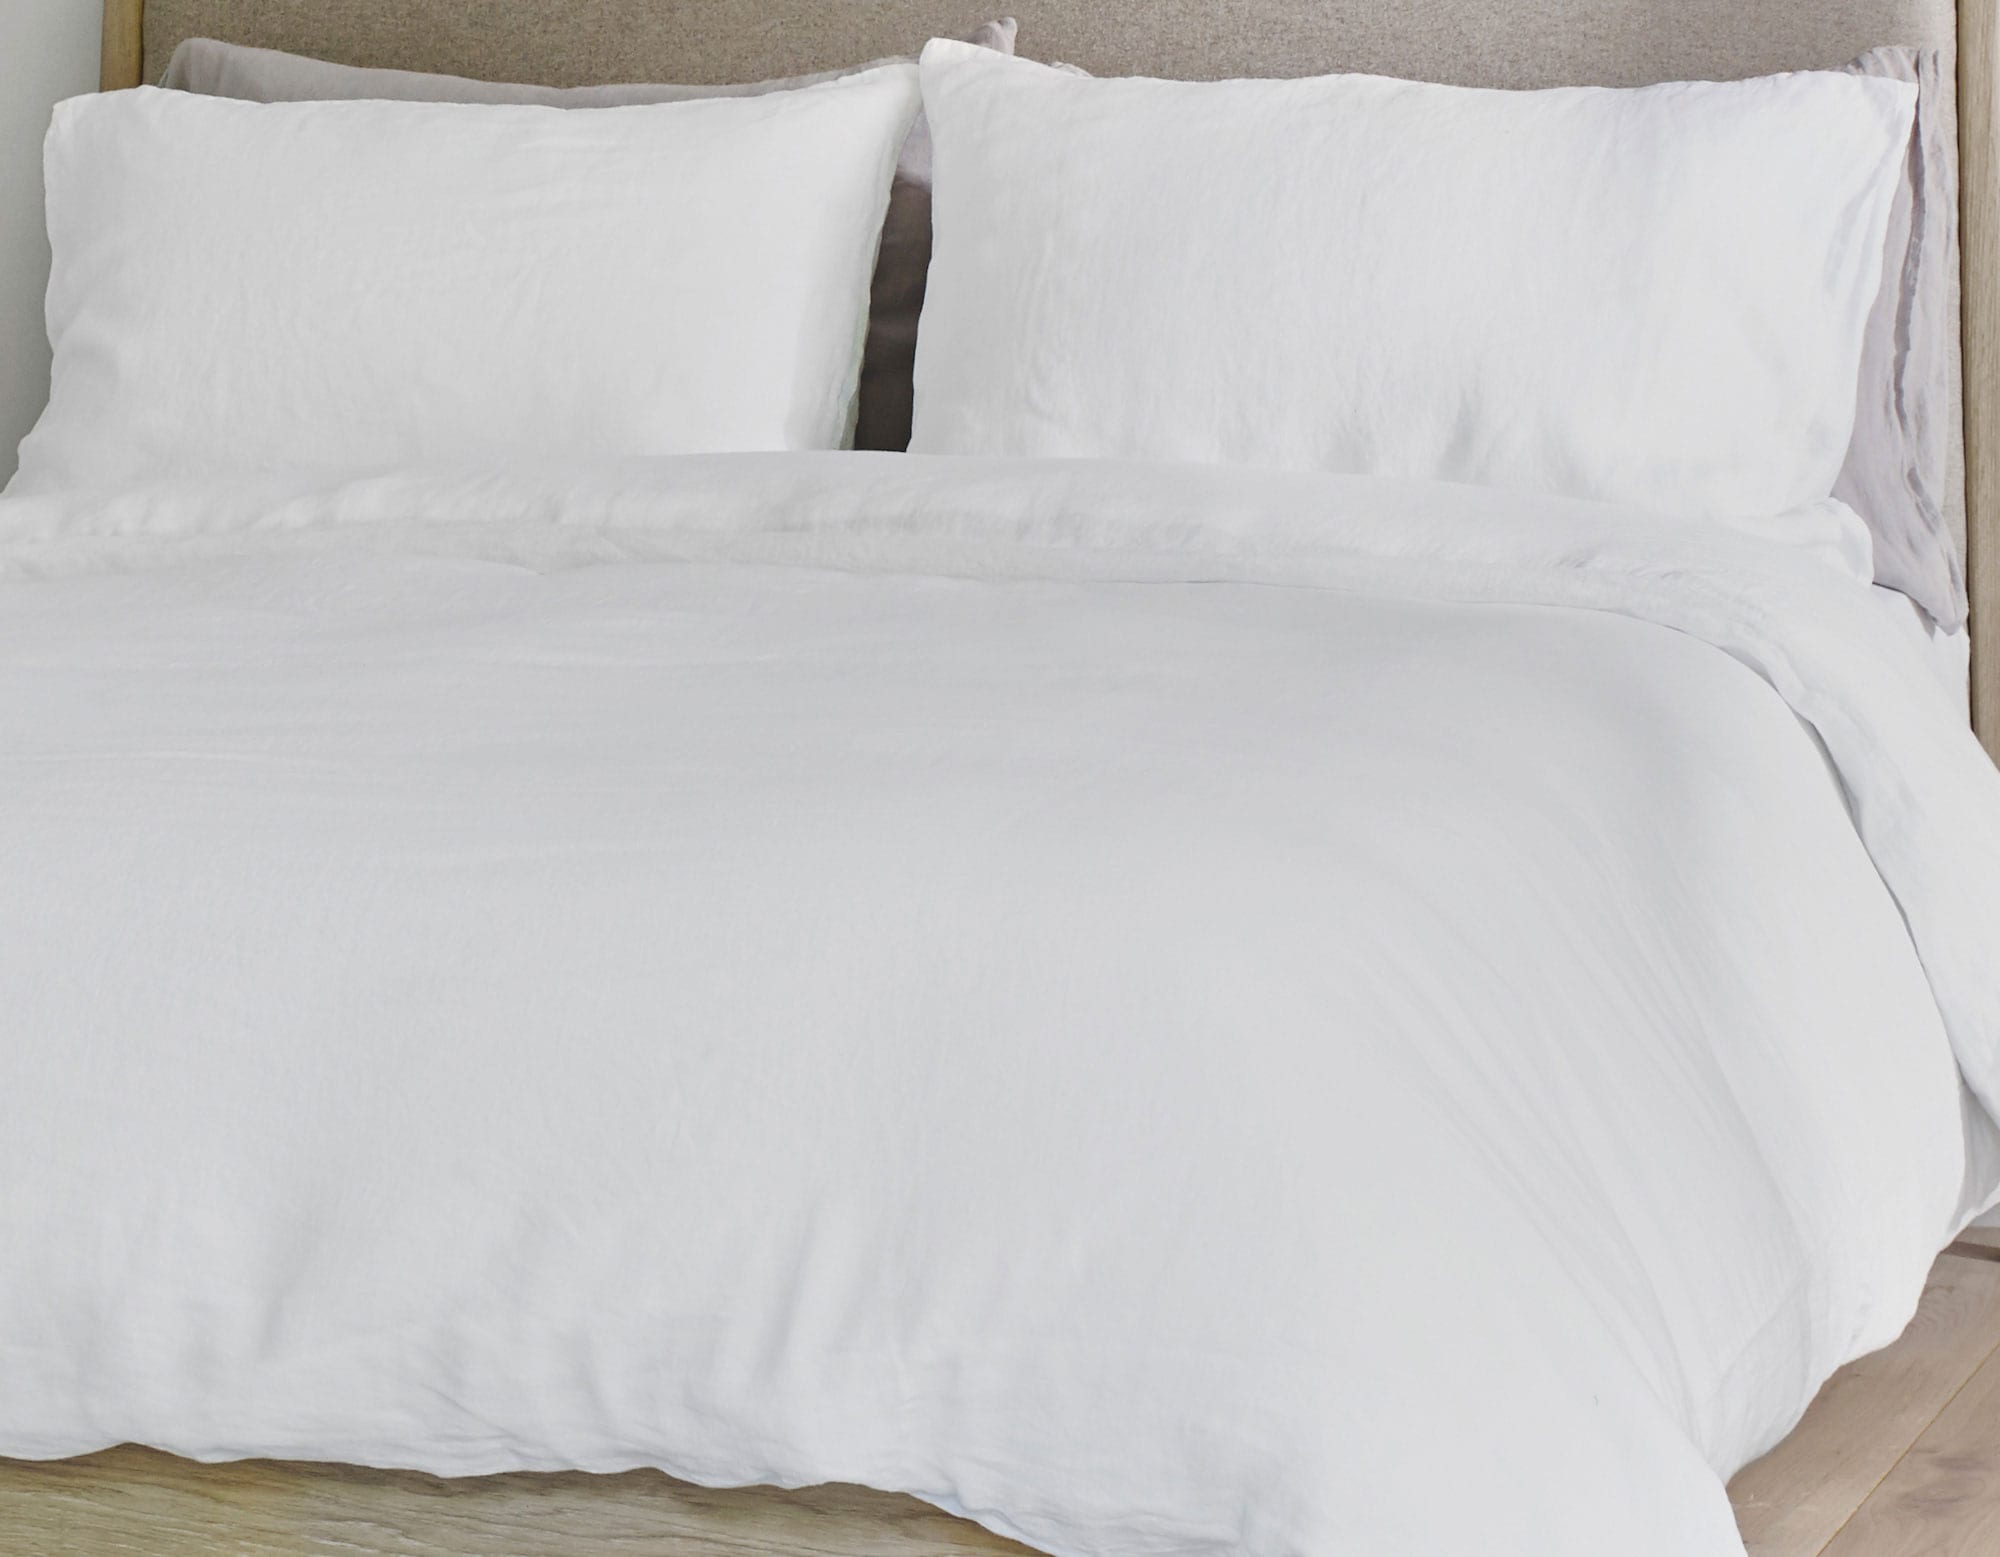 King size linen pillowcases with linen duvet cover on made bed 